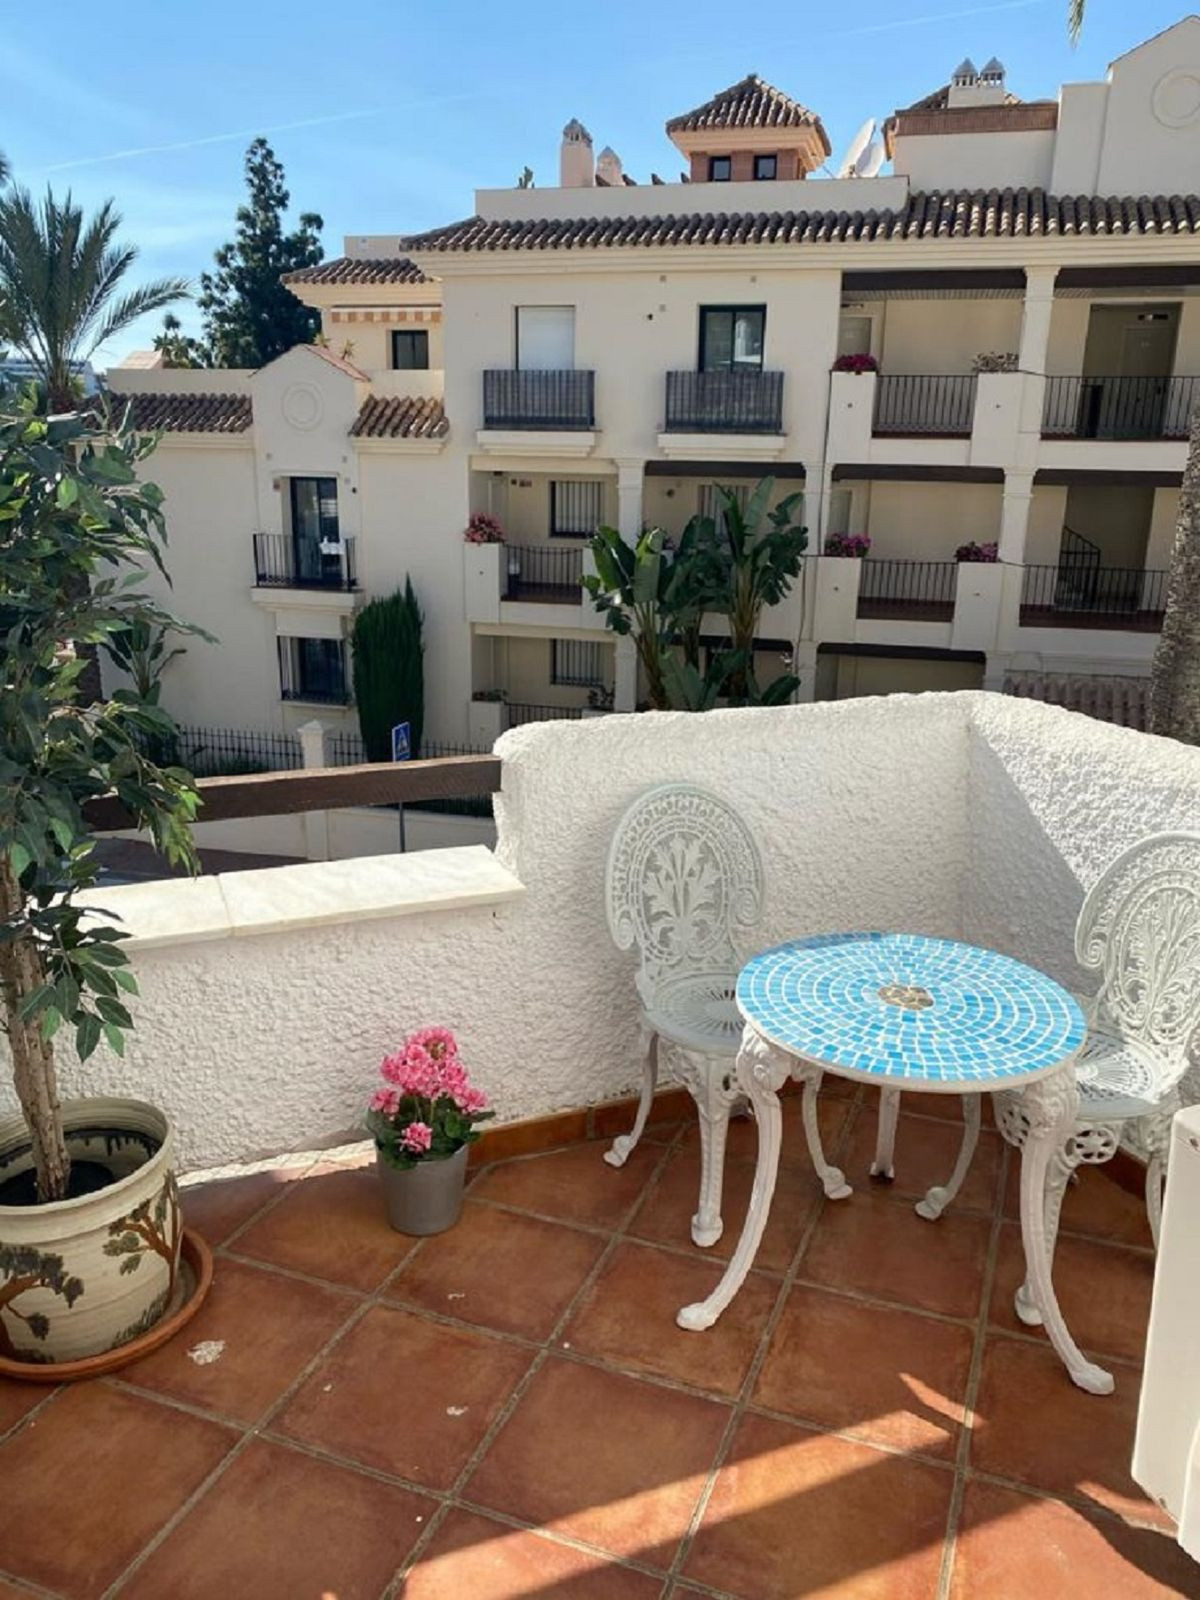 						Apartment  Middle Floor
													for sale 
																			 in Nueva Andalucía
					